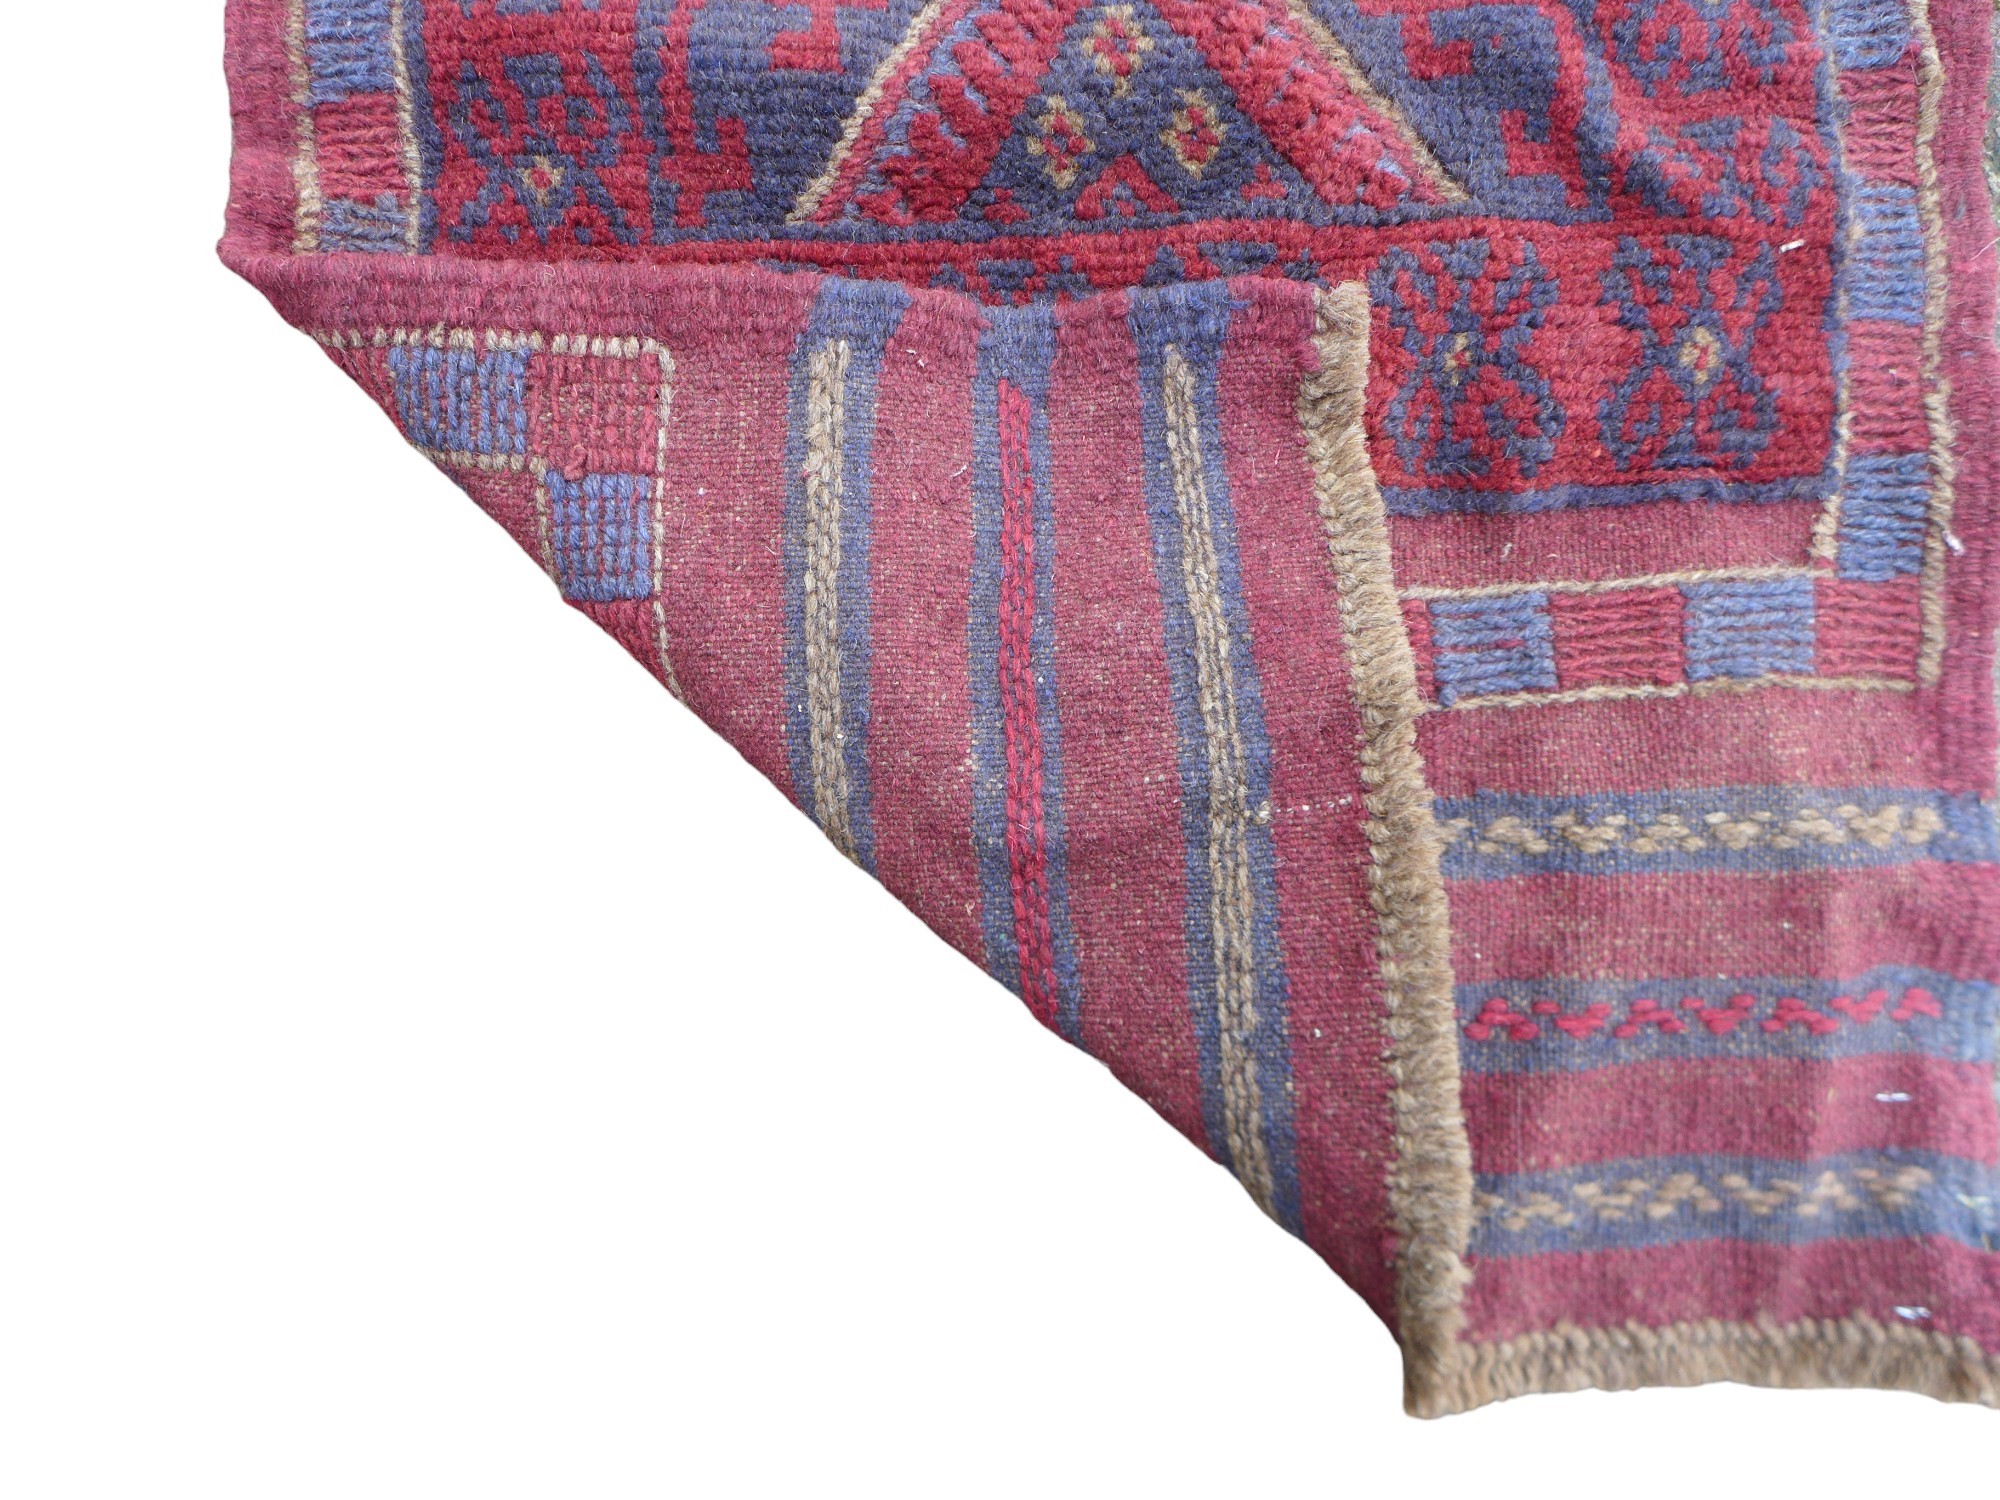 Red and blue geometric 100% hand knotted woollen runner rug, 240 by 60cm. - Image 2 of 3